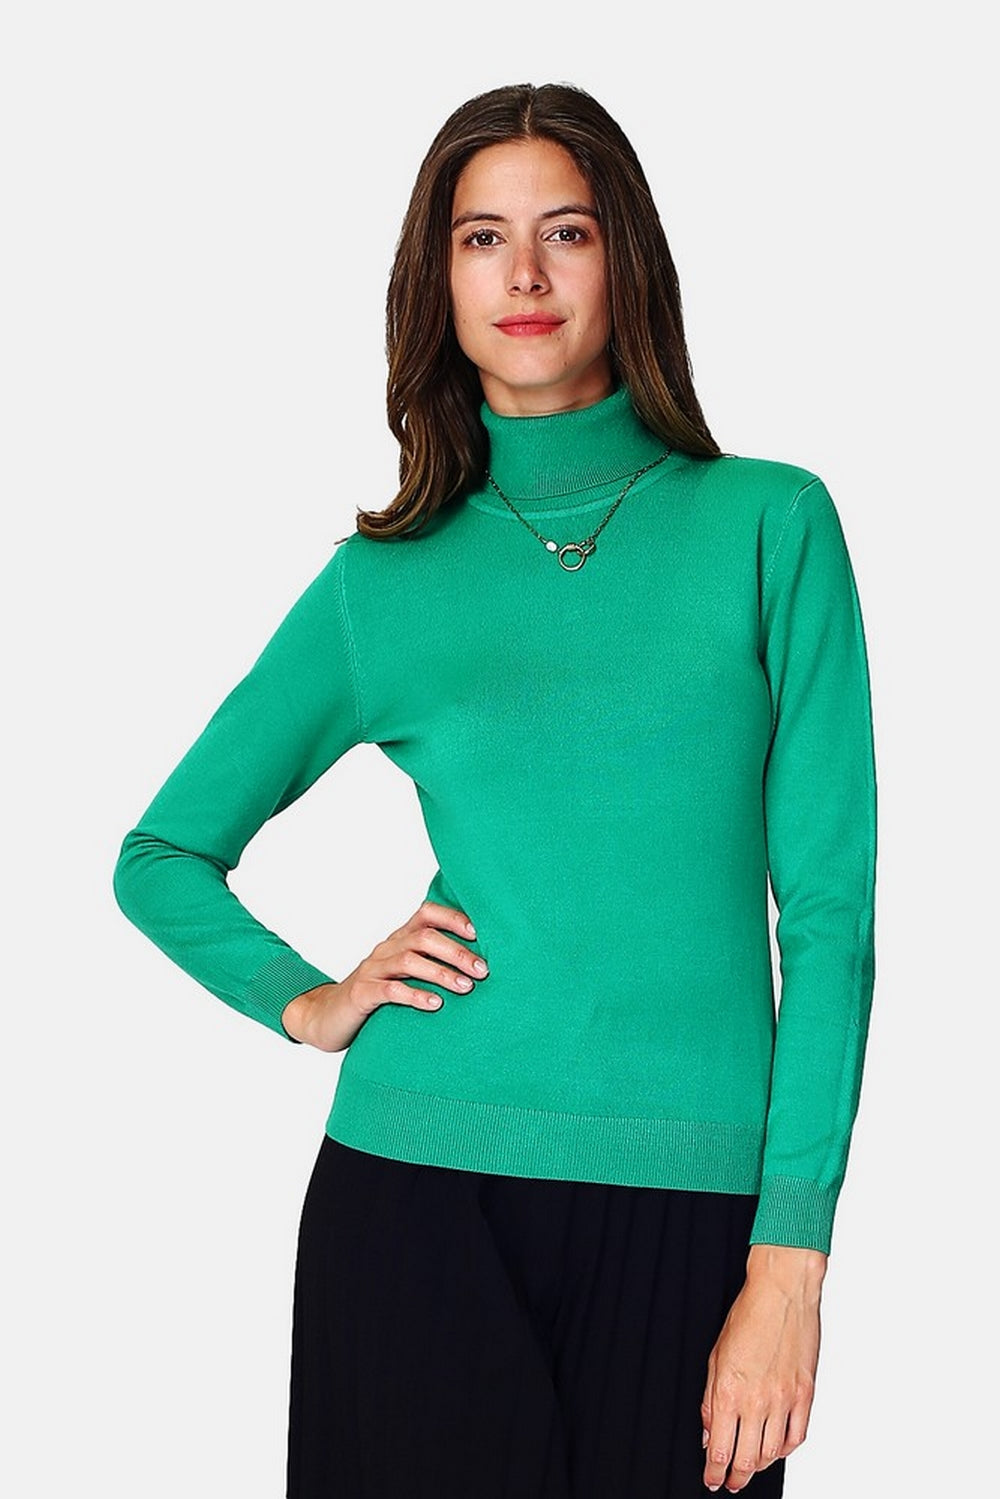 Classic 3-ply knit turtleneck sweater with long sleeve